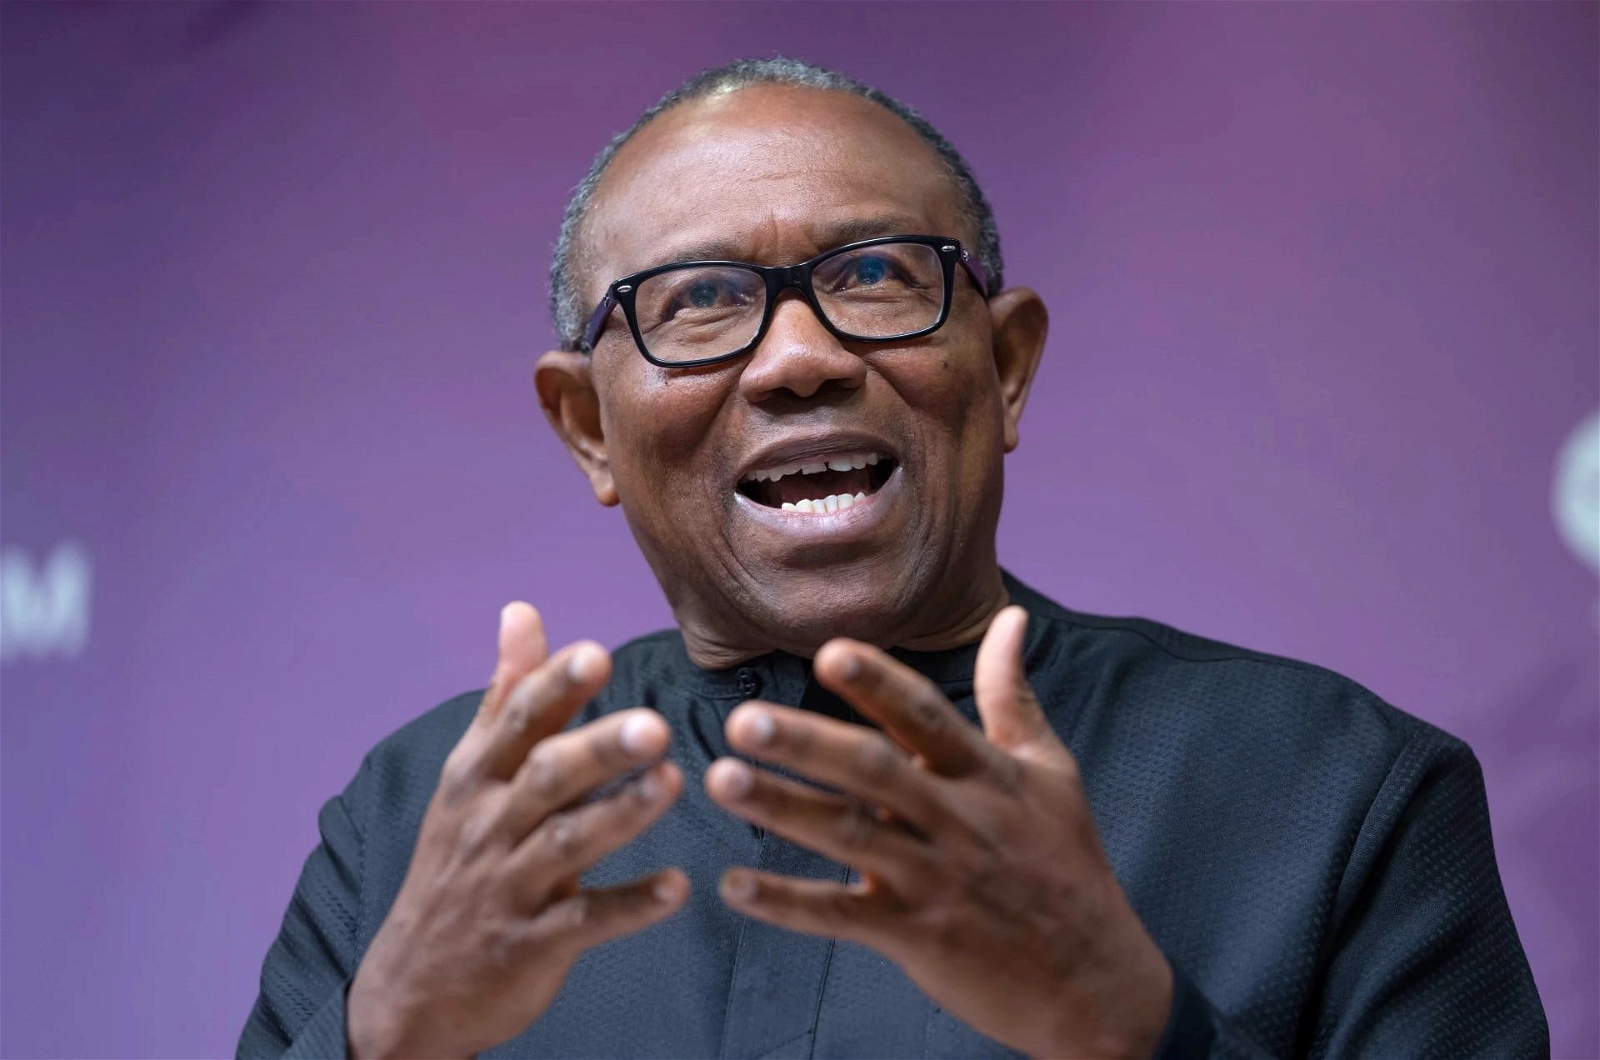 Demolitions of houses by govts bring extra hardship on people - Peter Obi